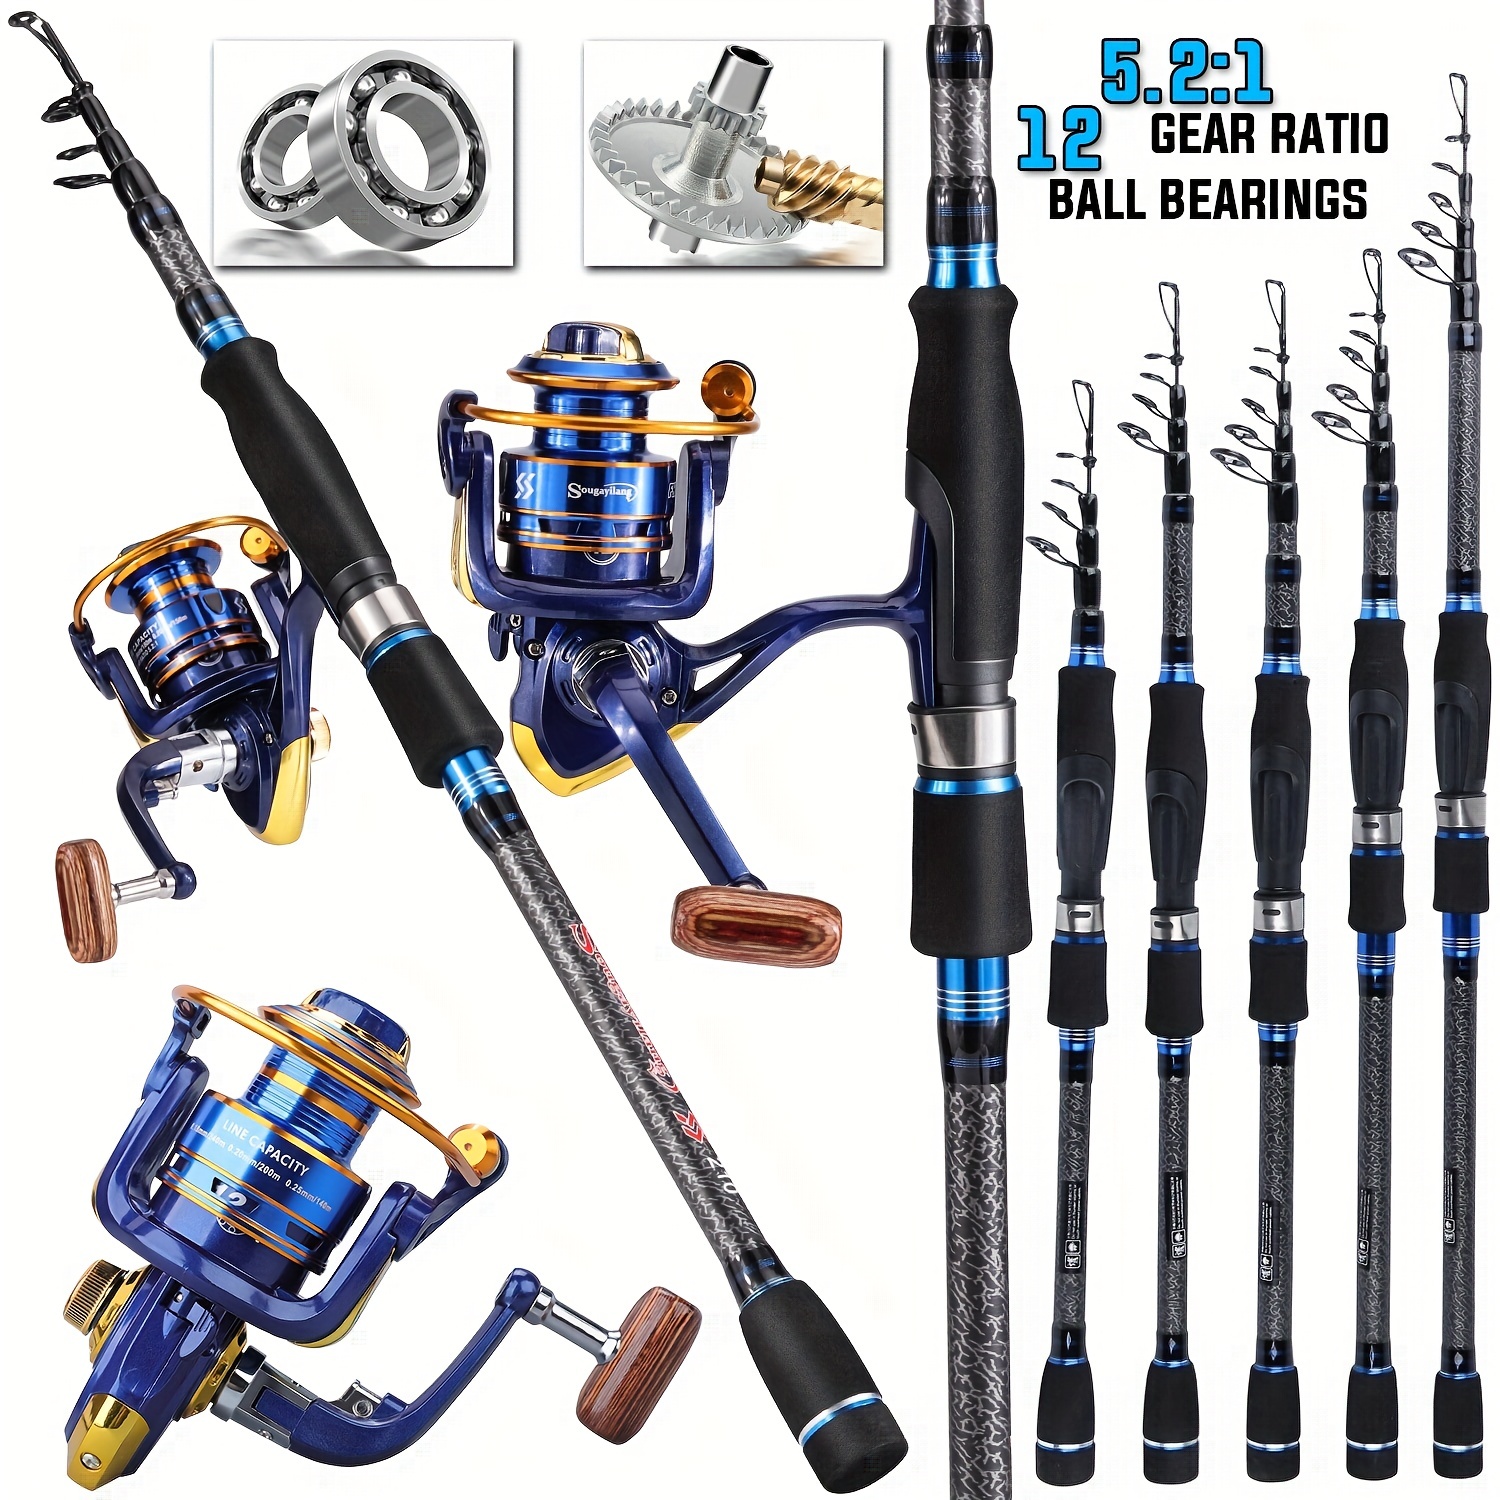 Portable Fishing Rod Telescopic Fishing Rod and Reel Combo Carbon Fiber  Travel Portable Fishing Pole Baitcasting Rods for Saltwater Freshwater Easy  to